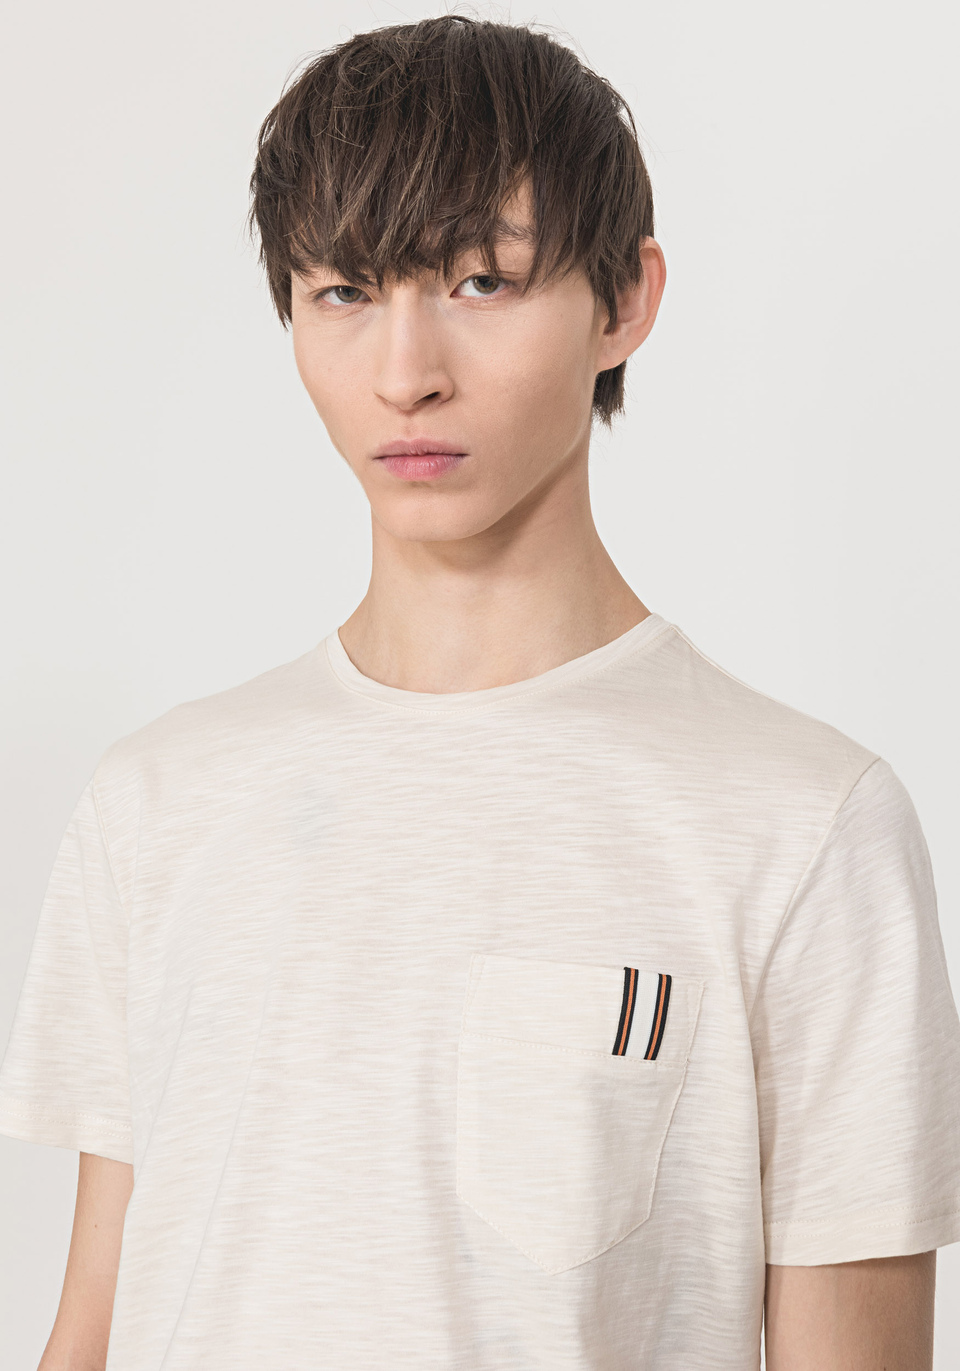 T-SHIRT IN 100% SLUB COTTON WITH BAND DETAIL ON POCKET - Antony Morato Online Shop